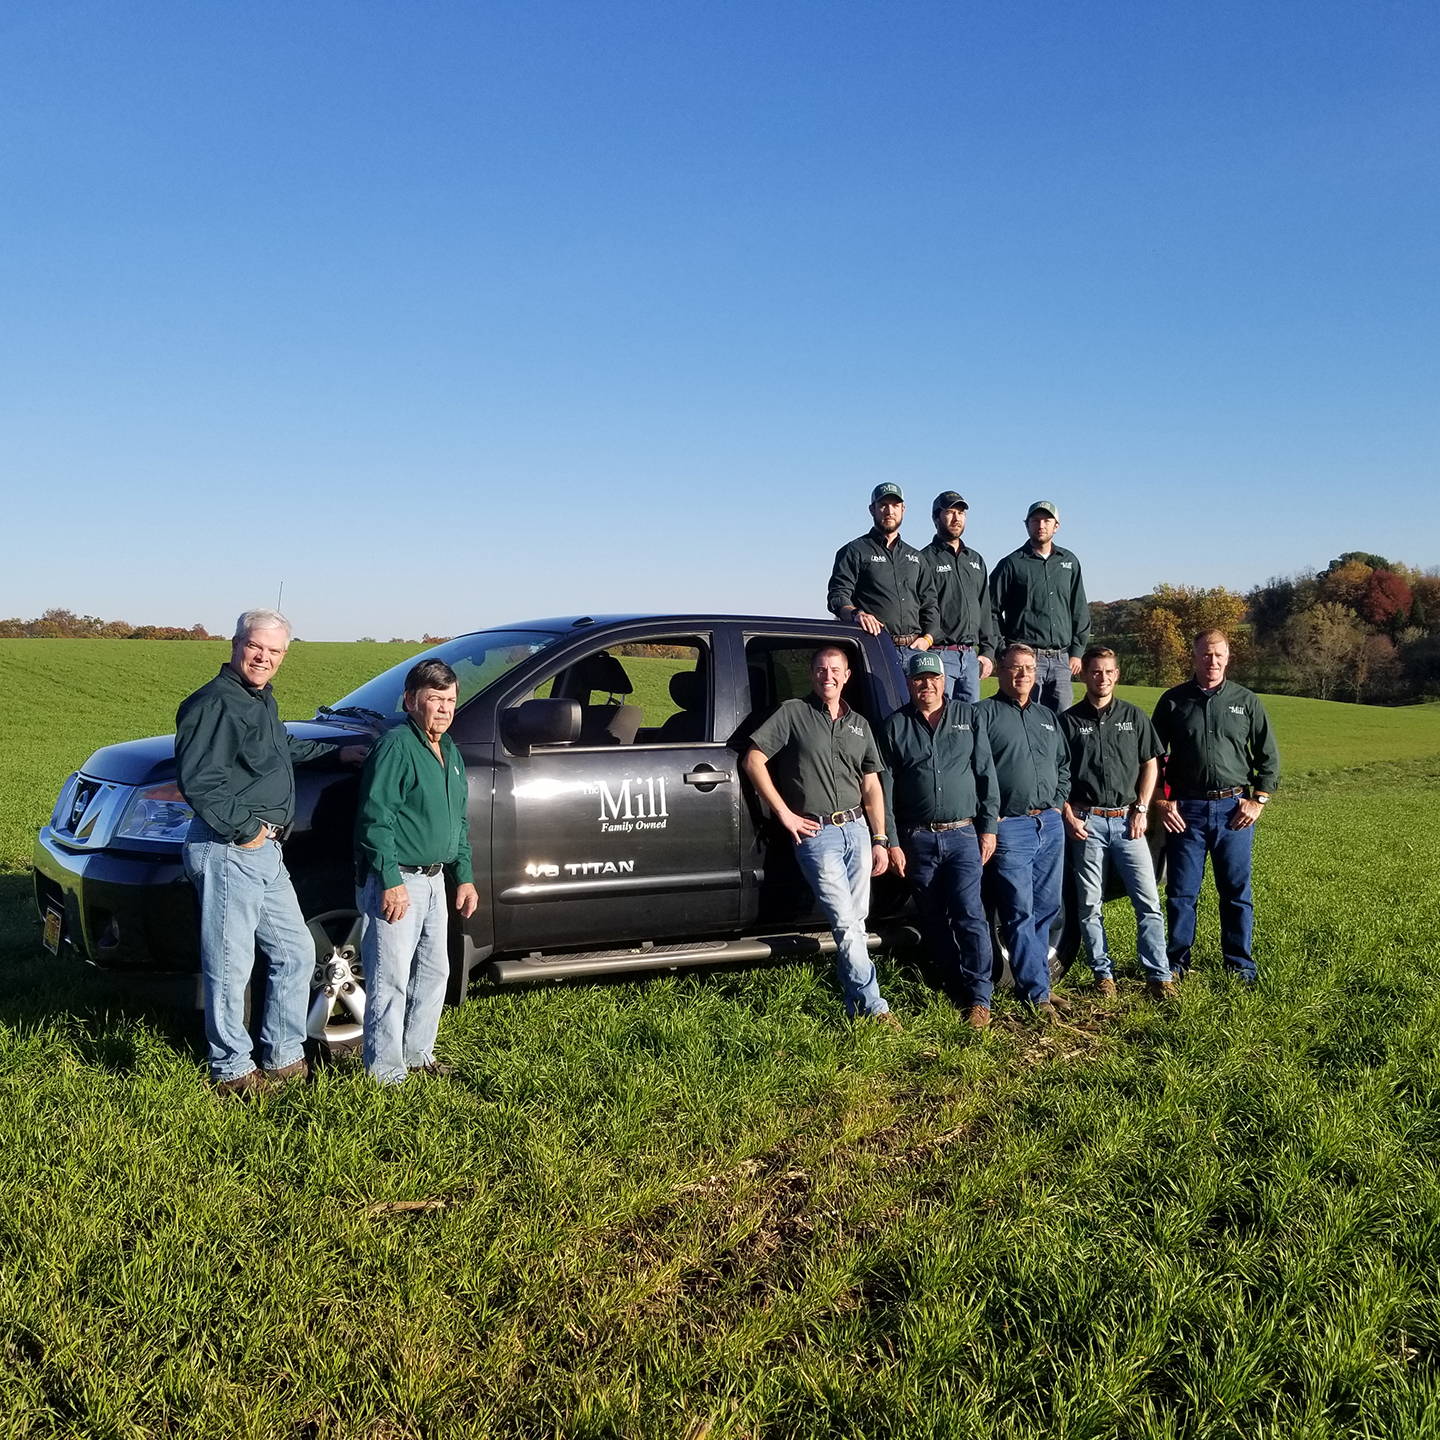 The Mill, agronomy team, agronomists, crops, fertilizer applicators